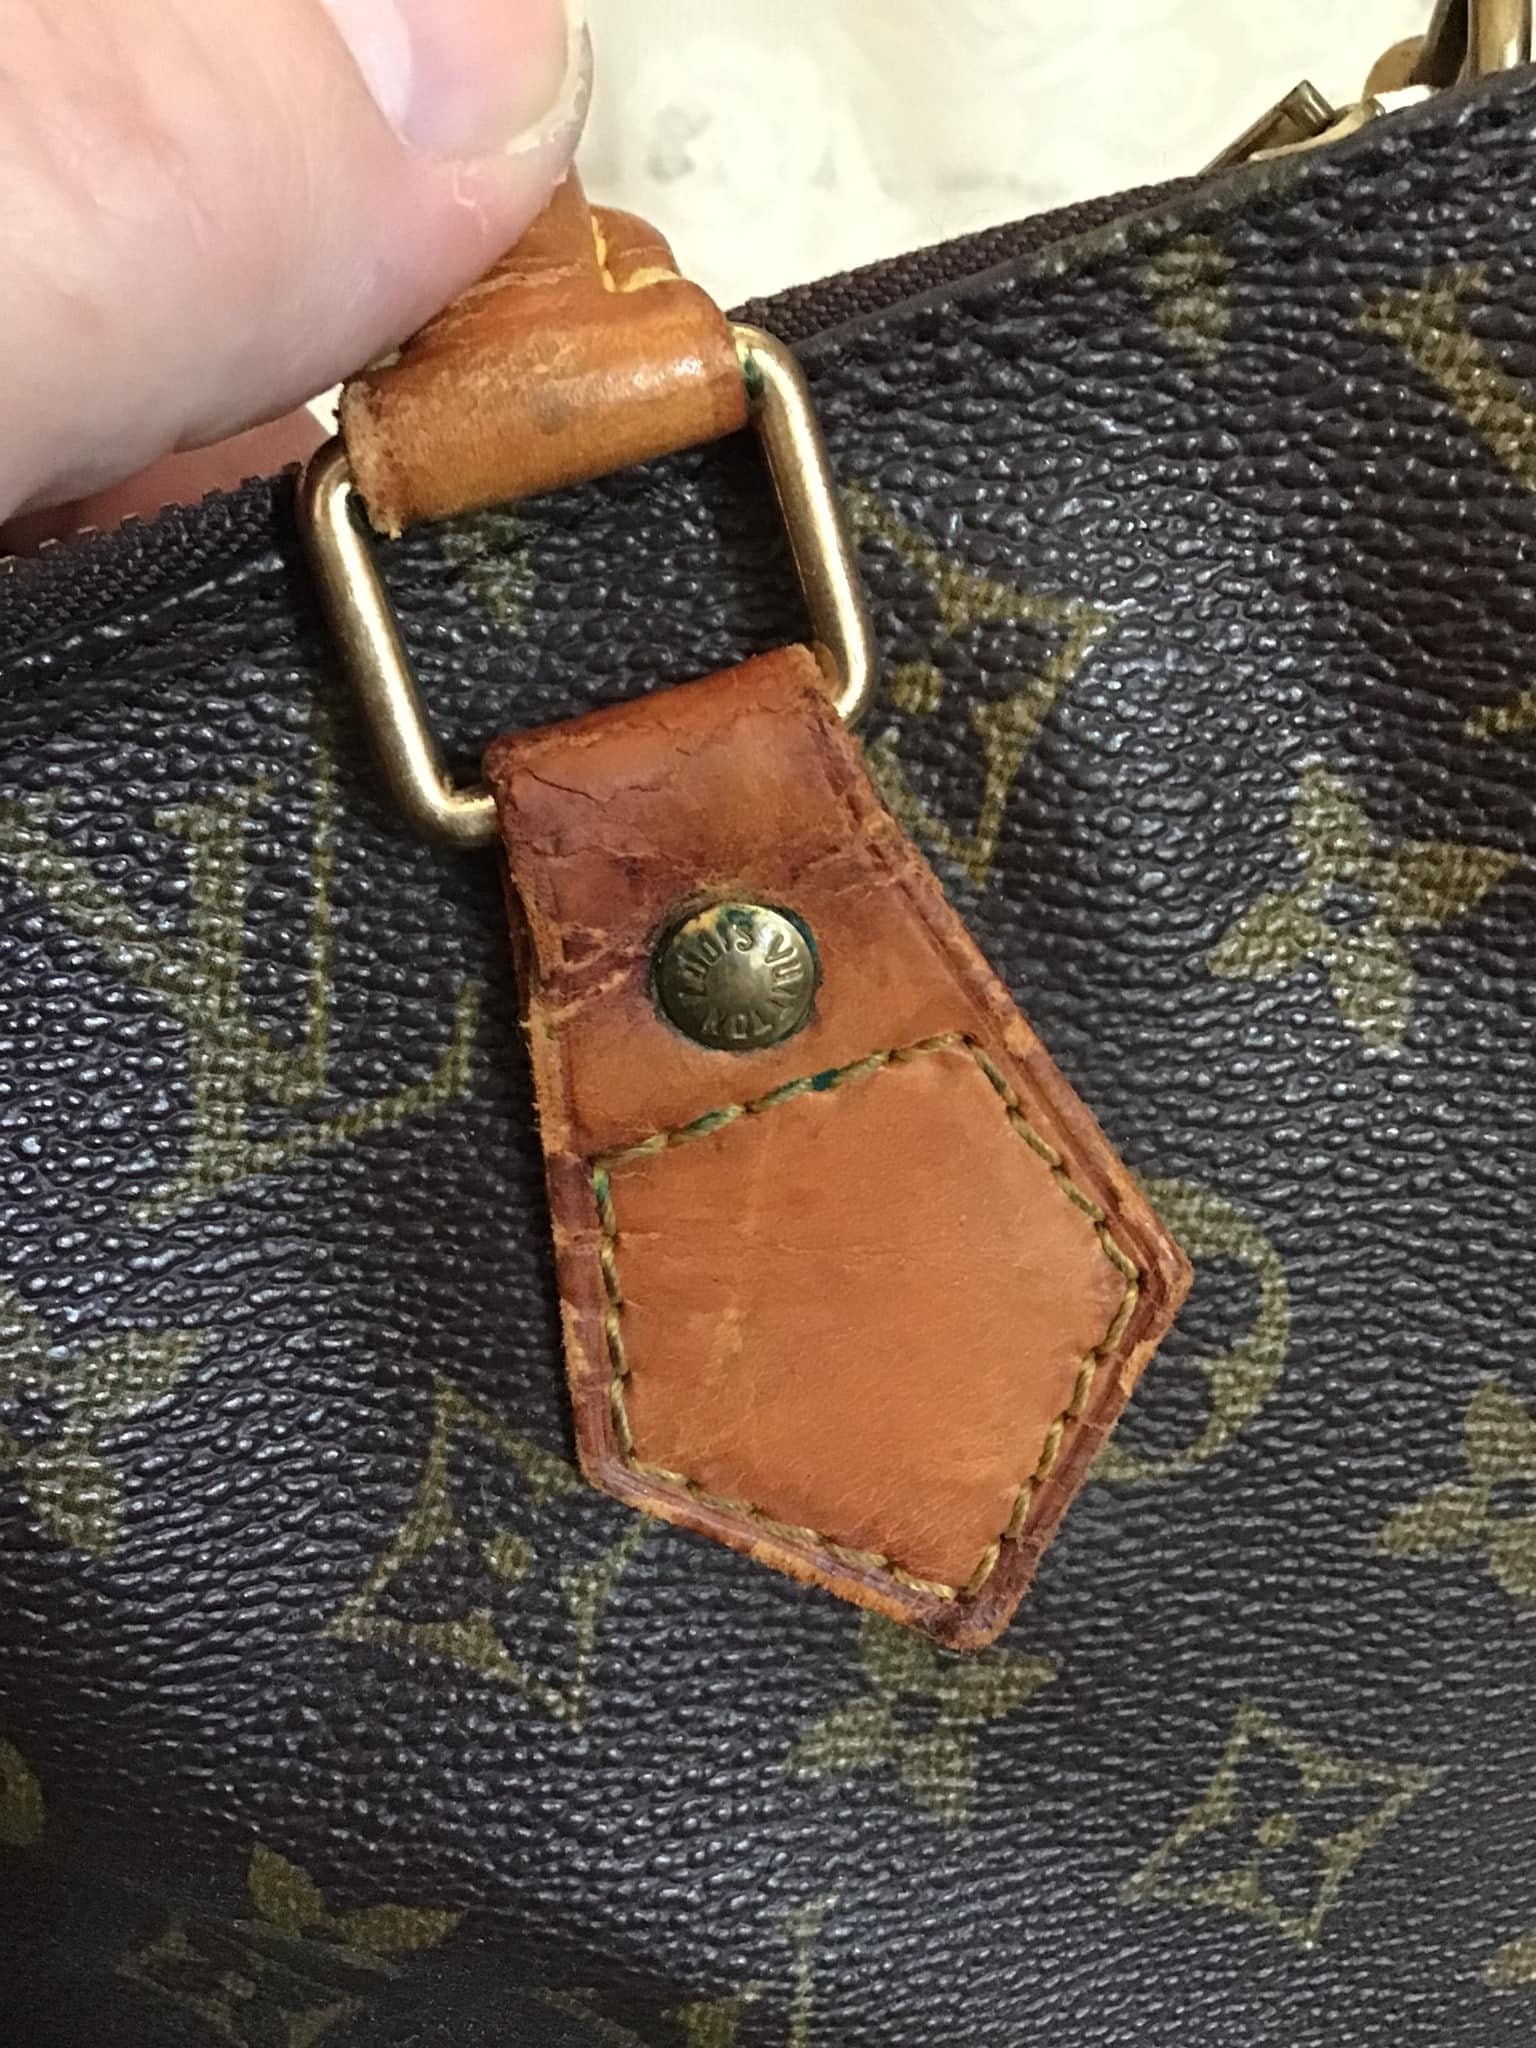 Certified Authentic LOUIS VUITTON Alma Hand Bag Vintage Monogram Logo LV  90s Purse + Handcrafted Matching Patina Strap